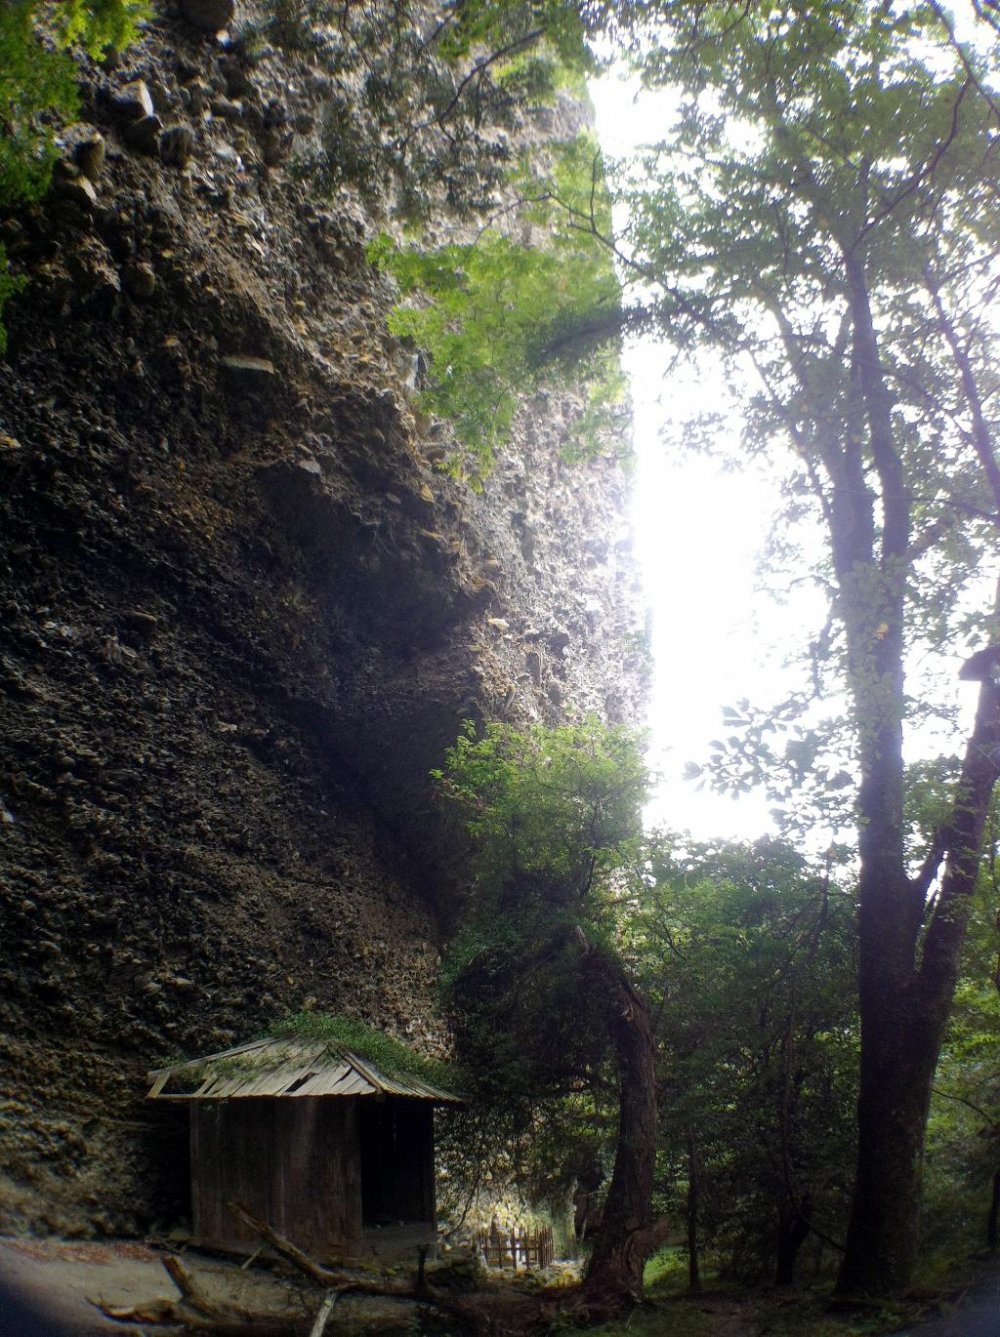 The awful awesome overhanging cliff